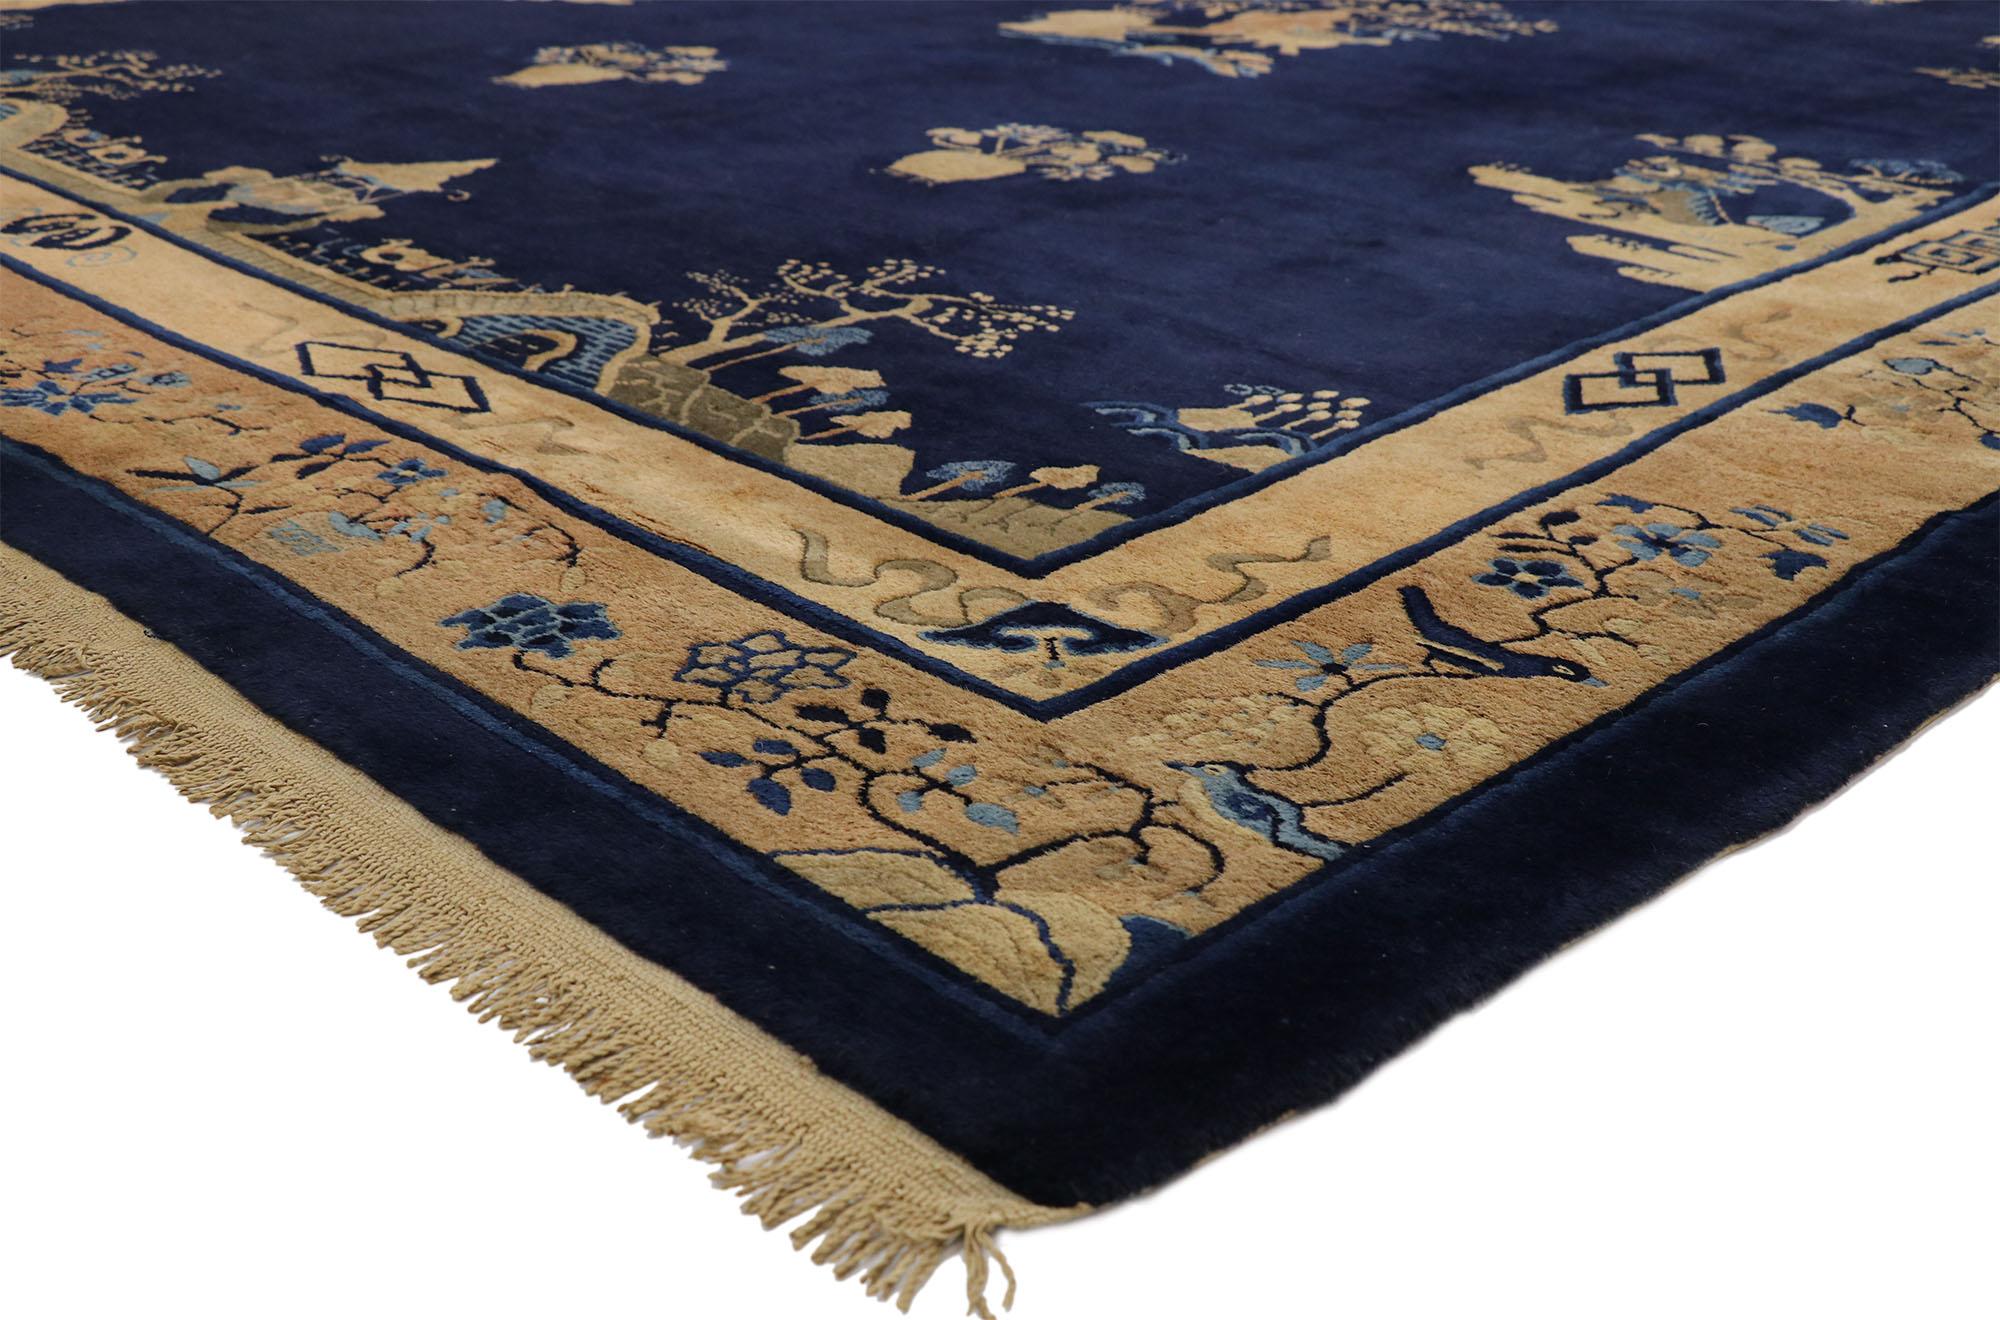 77375, antique Chinese Peking rug with landscape scenes and chinoiserie style. This hand knotted wool antique Chinese Peking rug features a variety of pictorial motifs floating on an abrashed ink blue field bookended by two landscape scenes. The